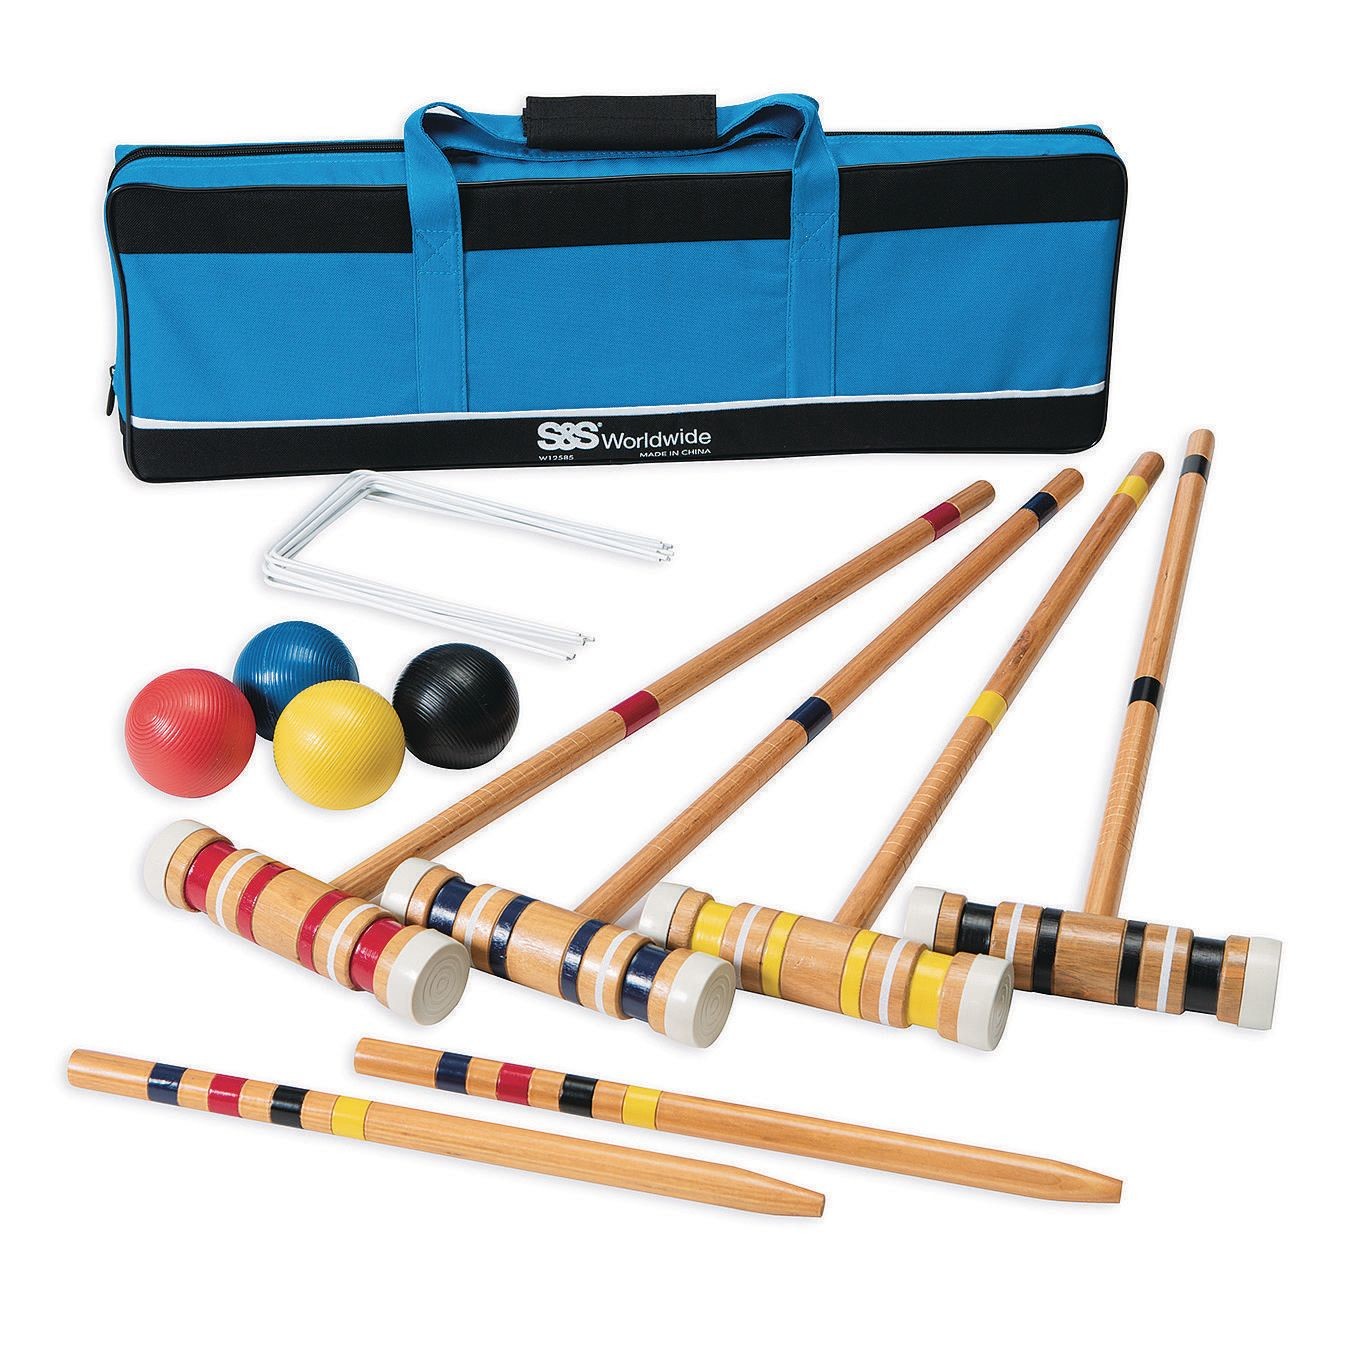 Buy Recreational Worldwide Set 4-Player S&S at Croquet